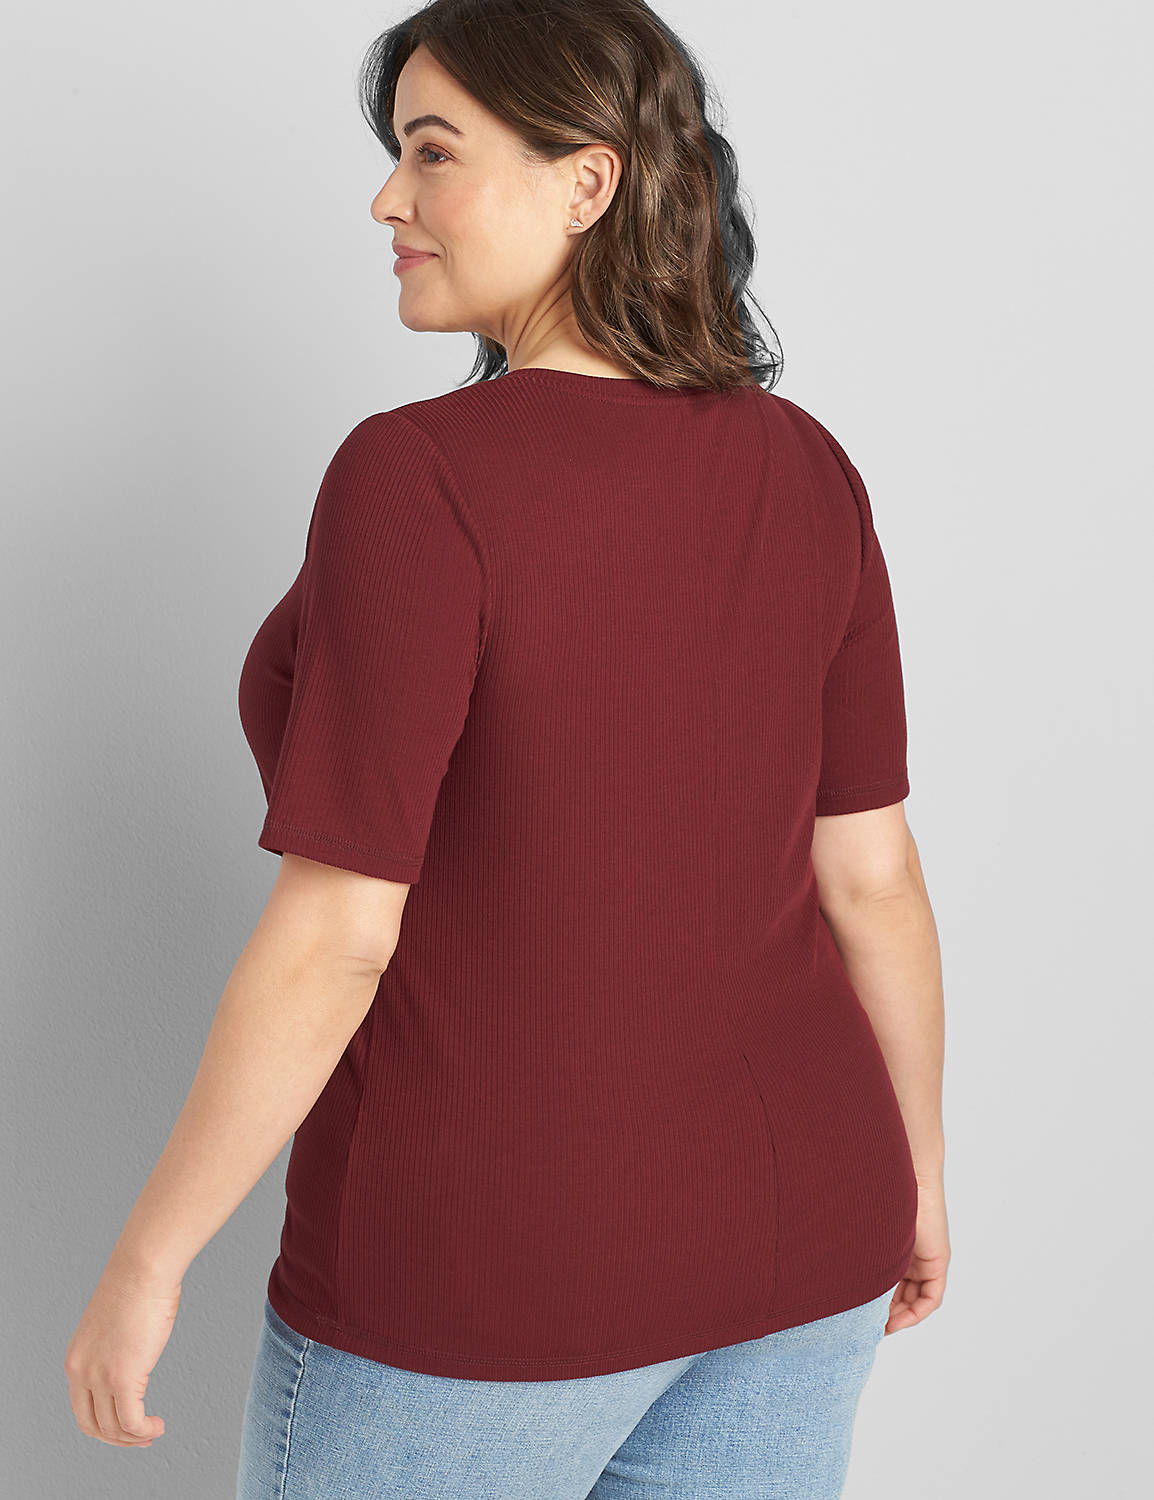 Perfect Sleeve Open Scoop Neck Ribbed Button Down Top 1121884 copy of 1121335:PANTONE Zinfandel:34/36 Product Image 2